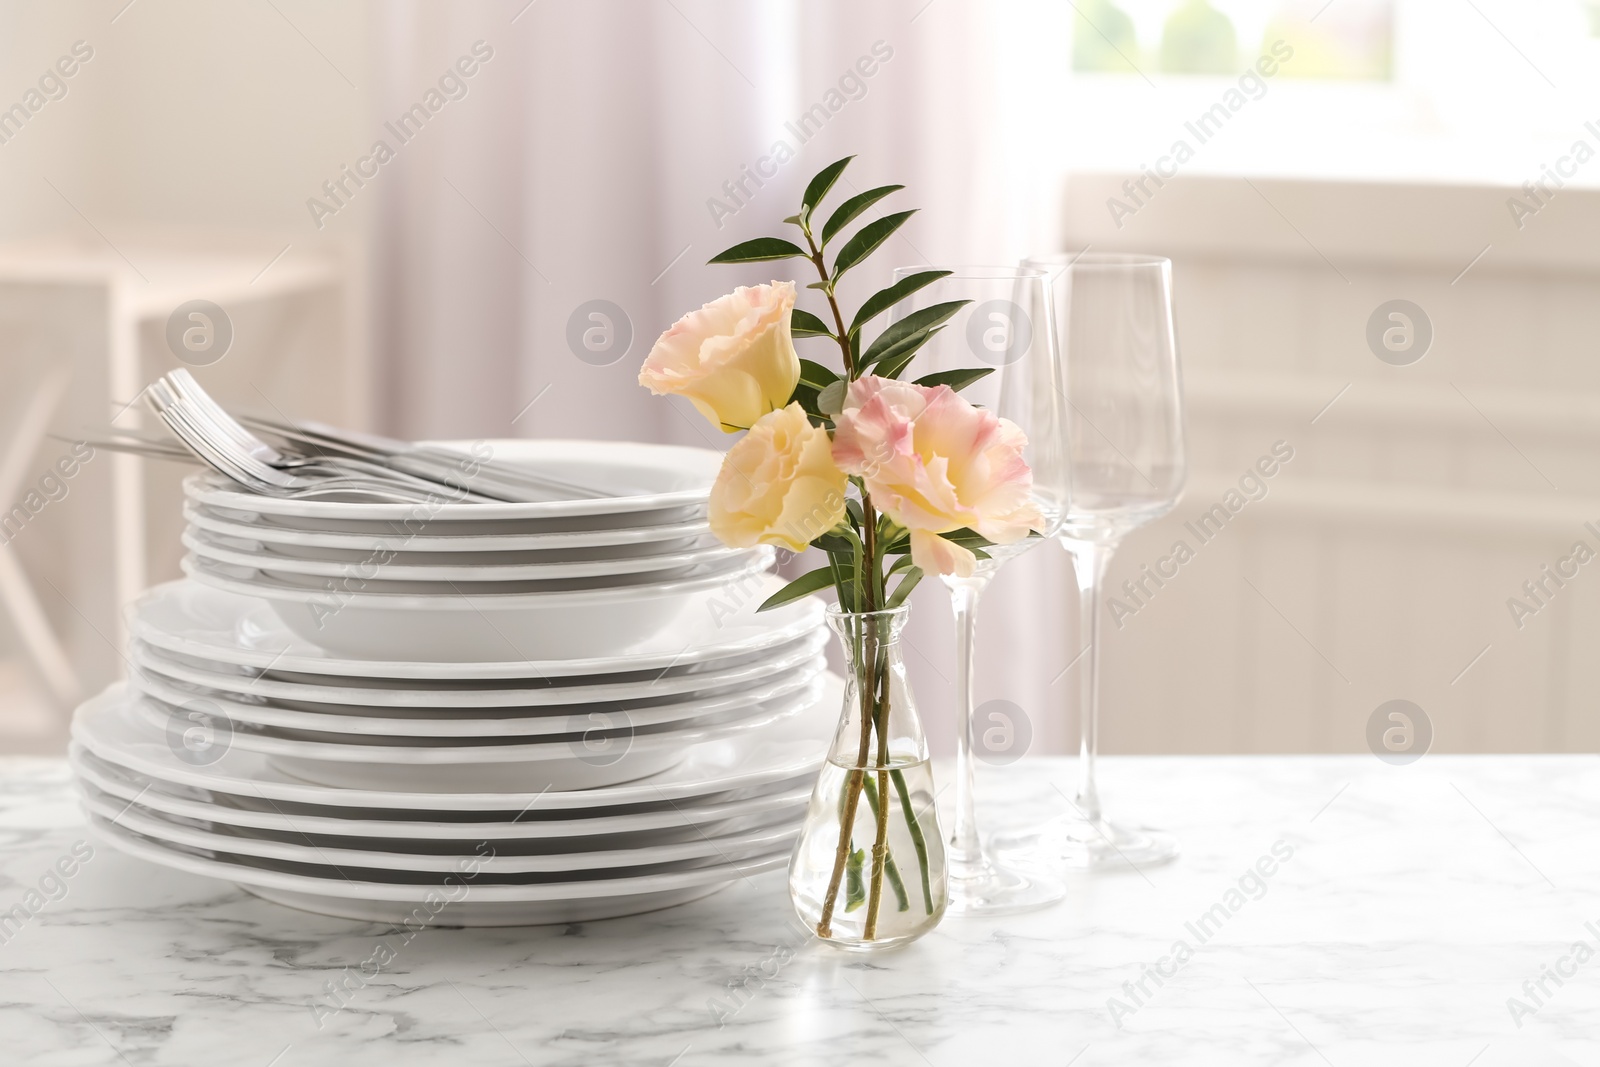 Photo of Set with clean dishes and vase of flowers on white marble table